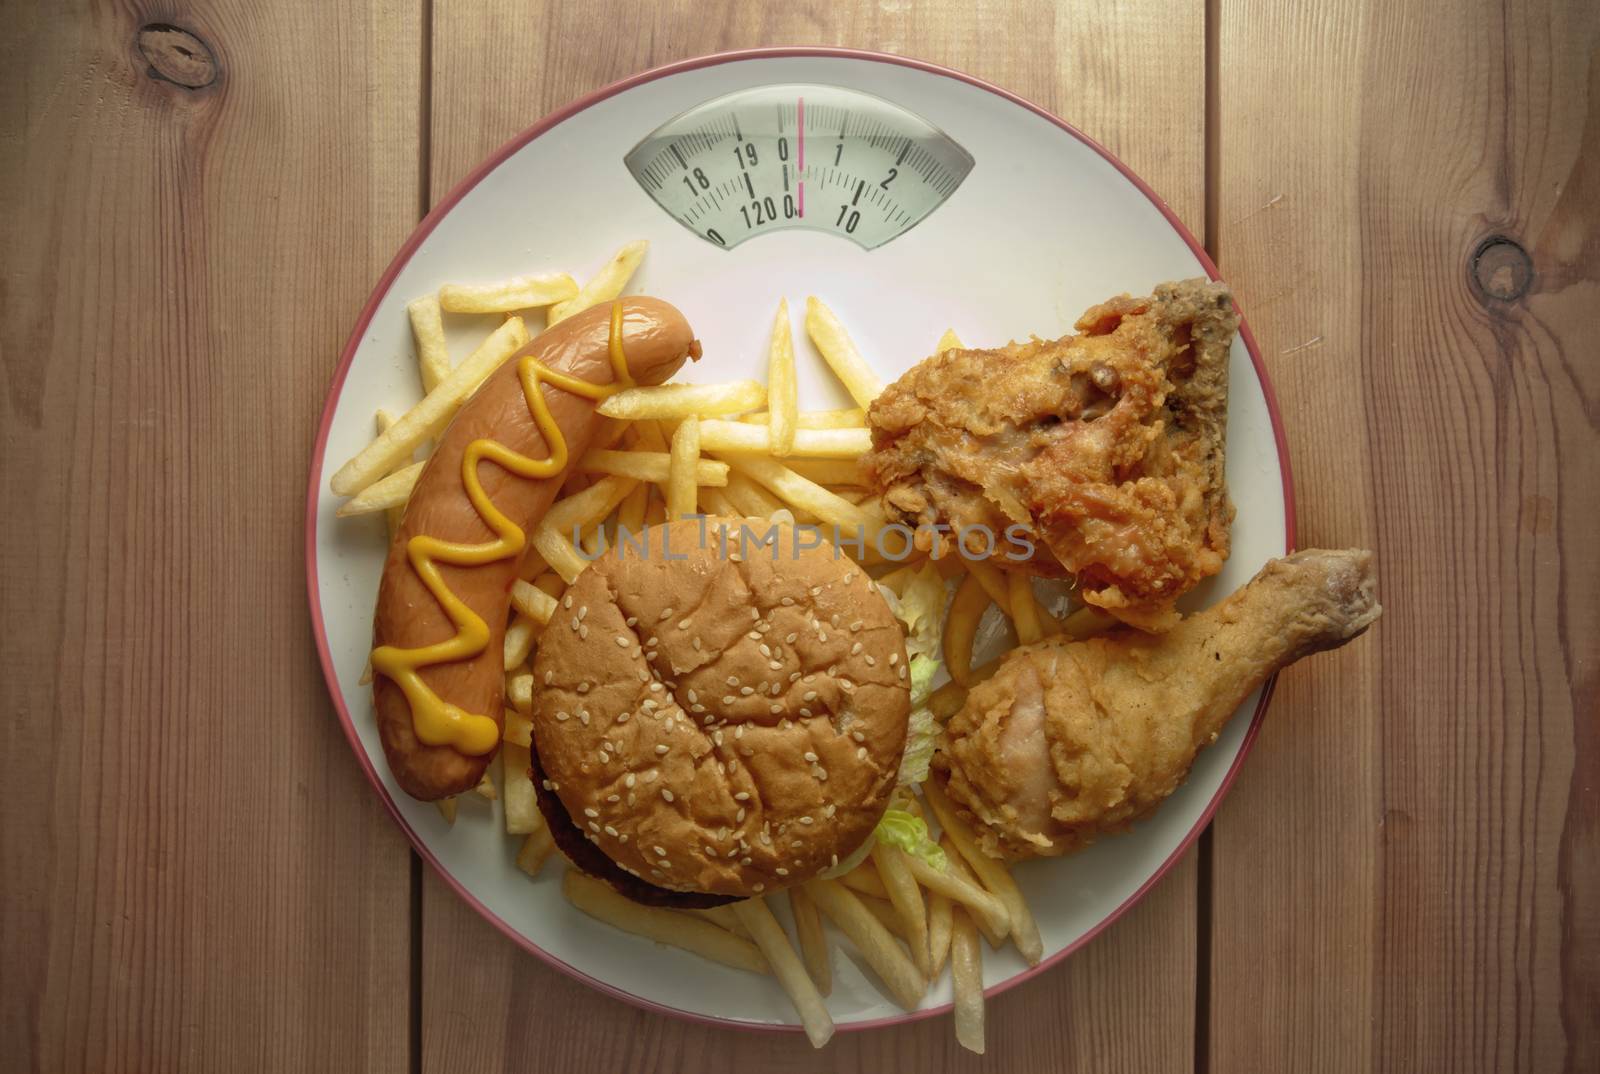 Plate packed with junk food with weighing scales 